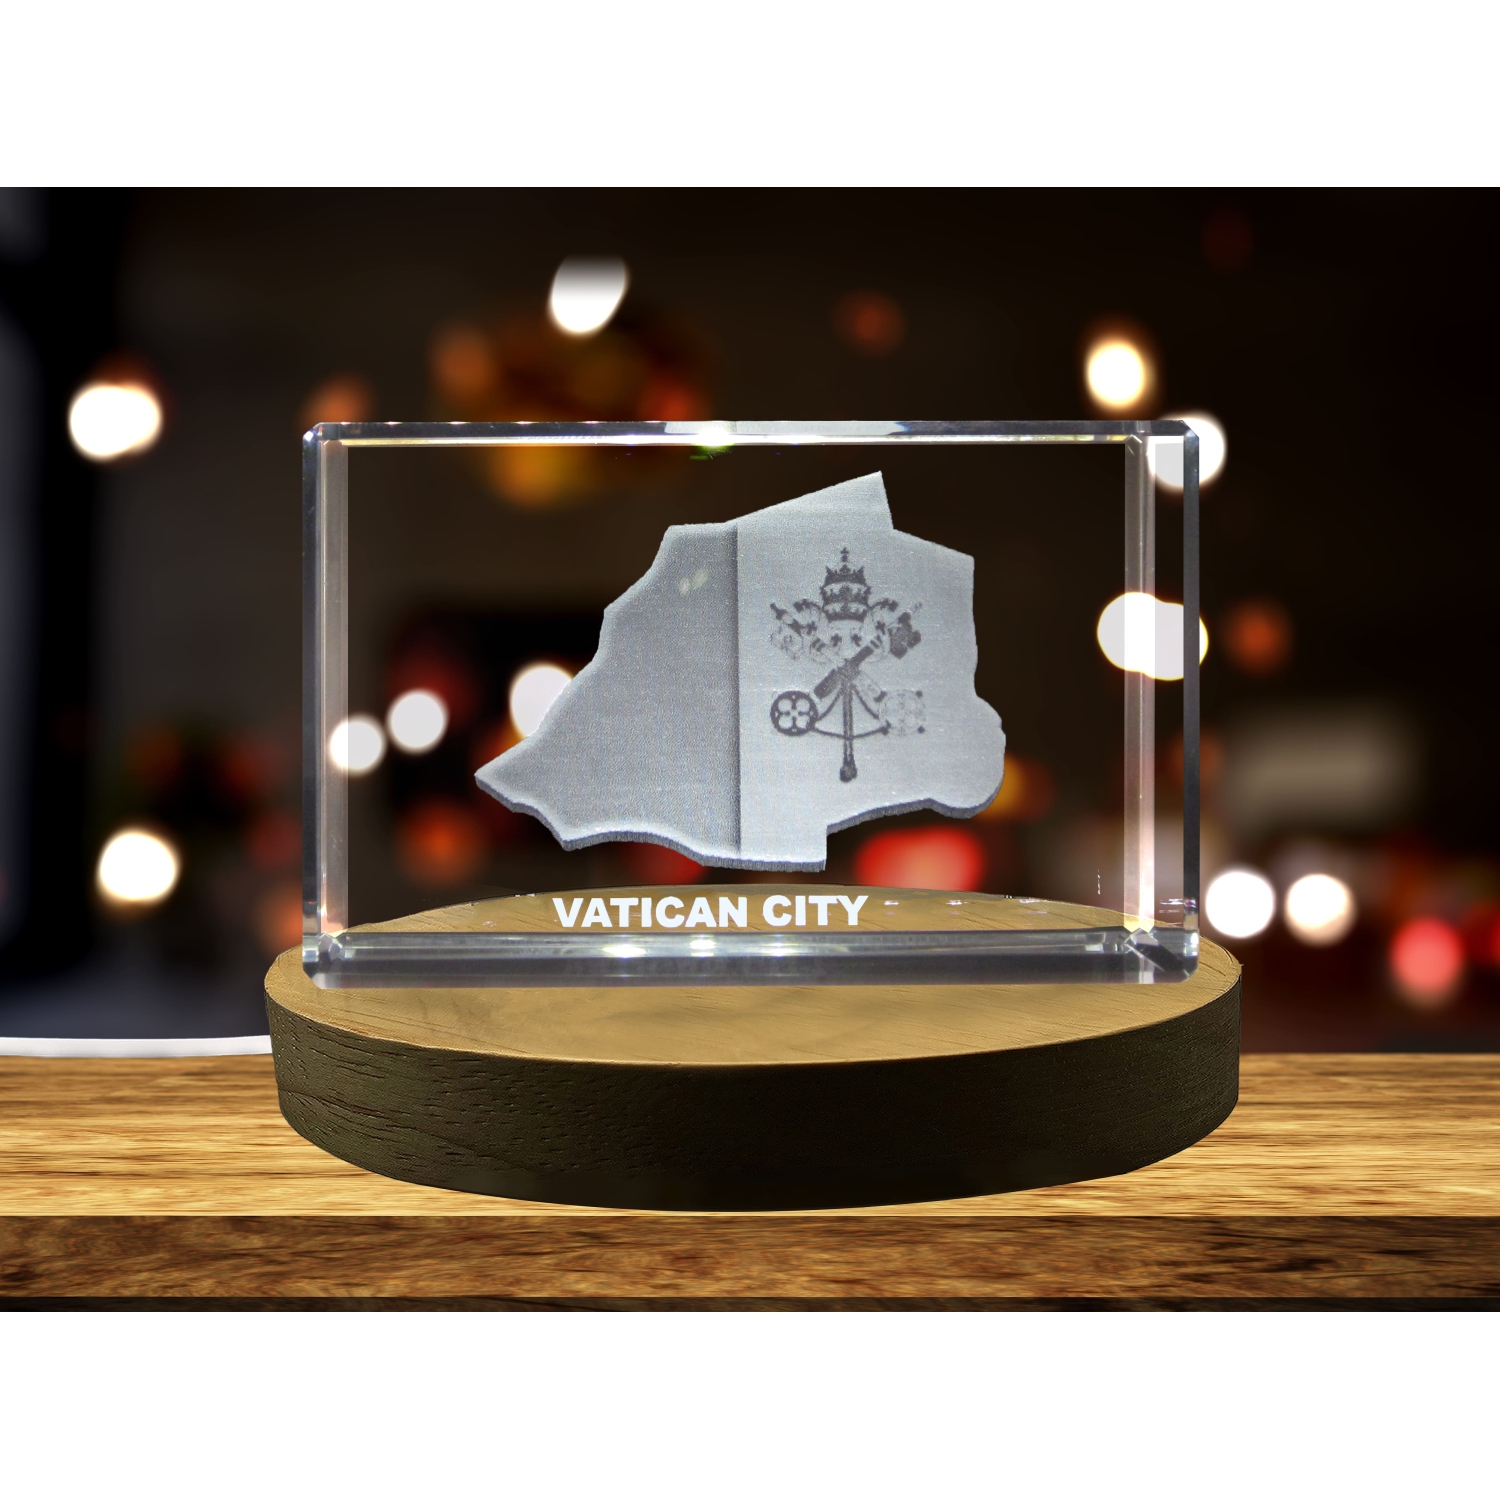 Holy See (Vatican City) 3D Engraved Crystal 3D Engraved Crystal Keepsake/Gift/Decor/Collectible/Souvenir